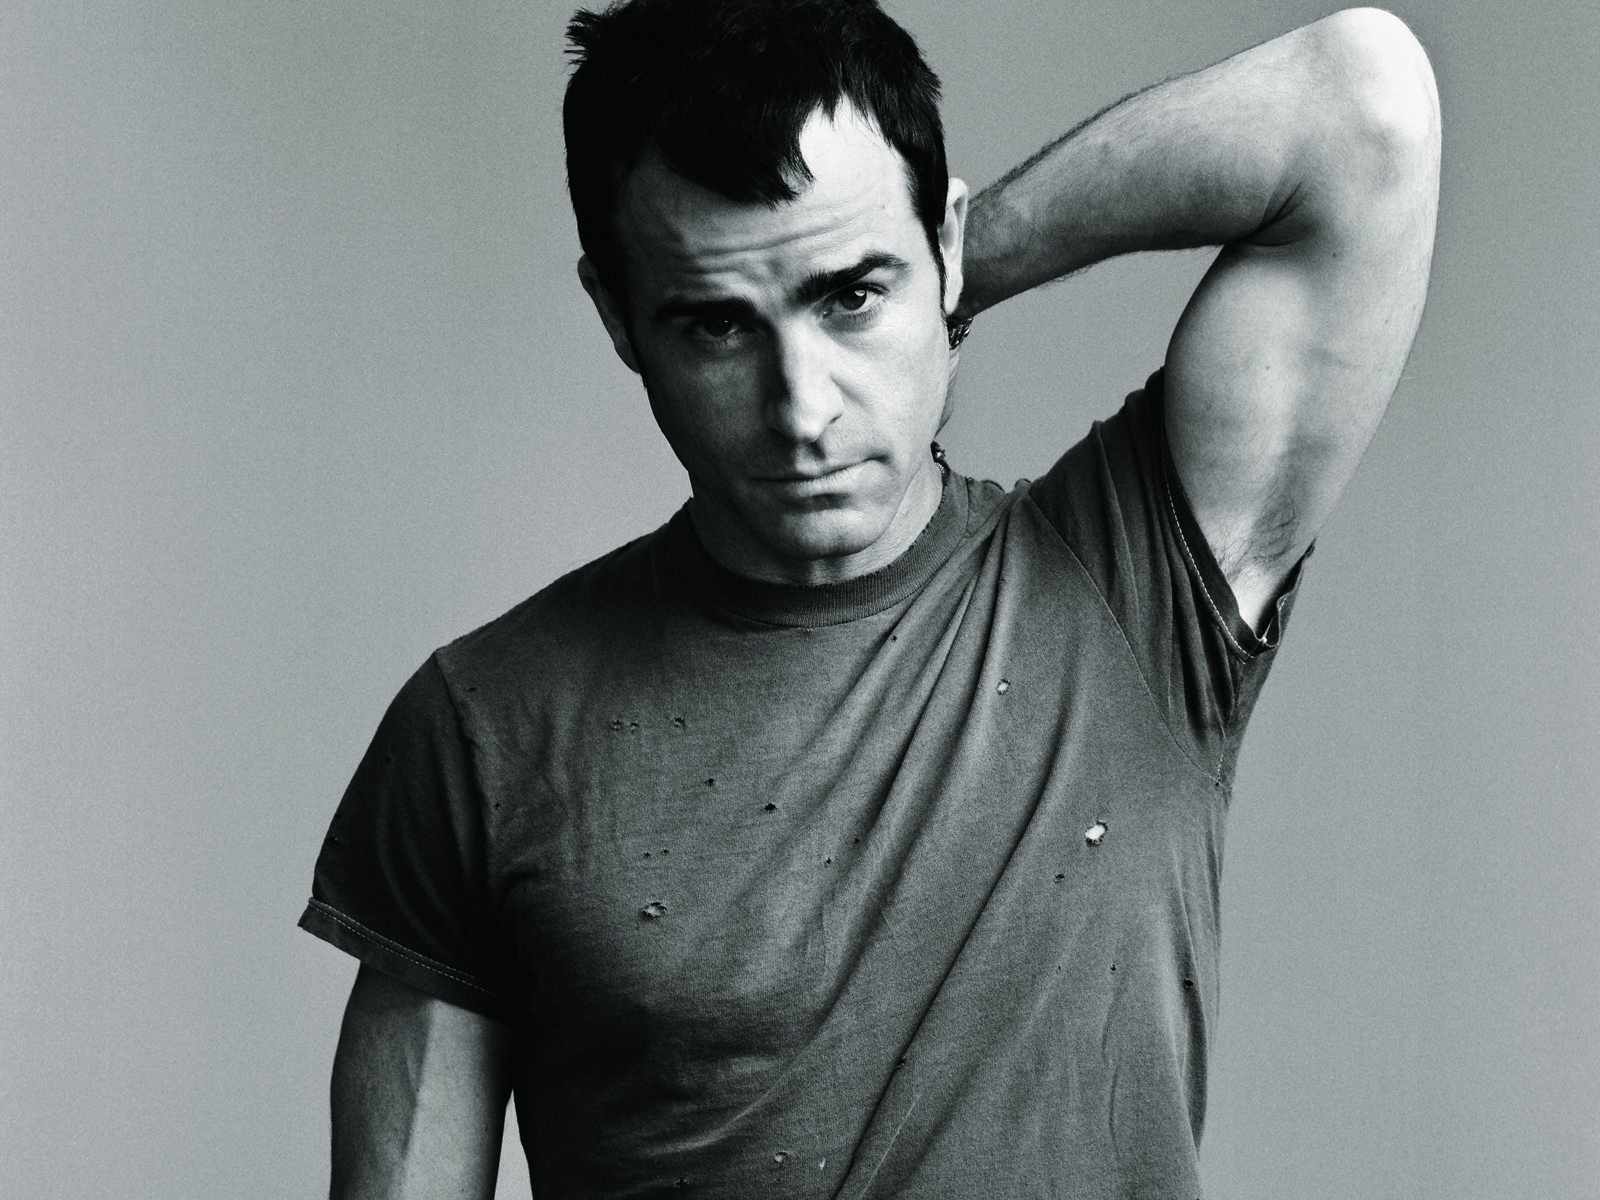 Justin Theroux Young Look for 1600 x 1200 resolution